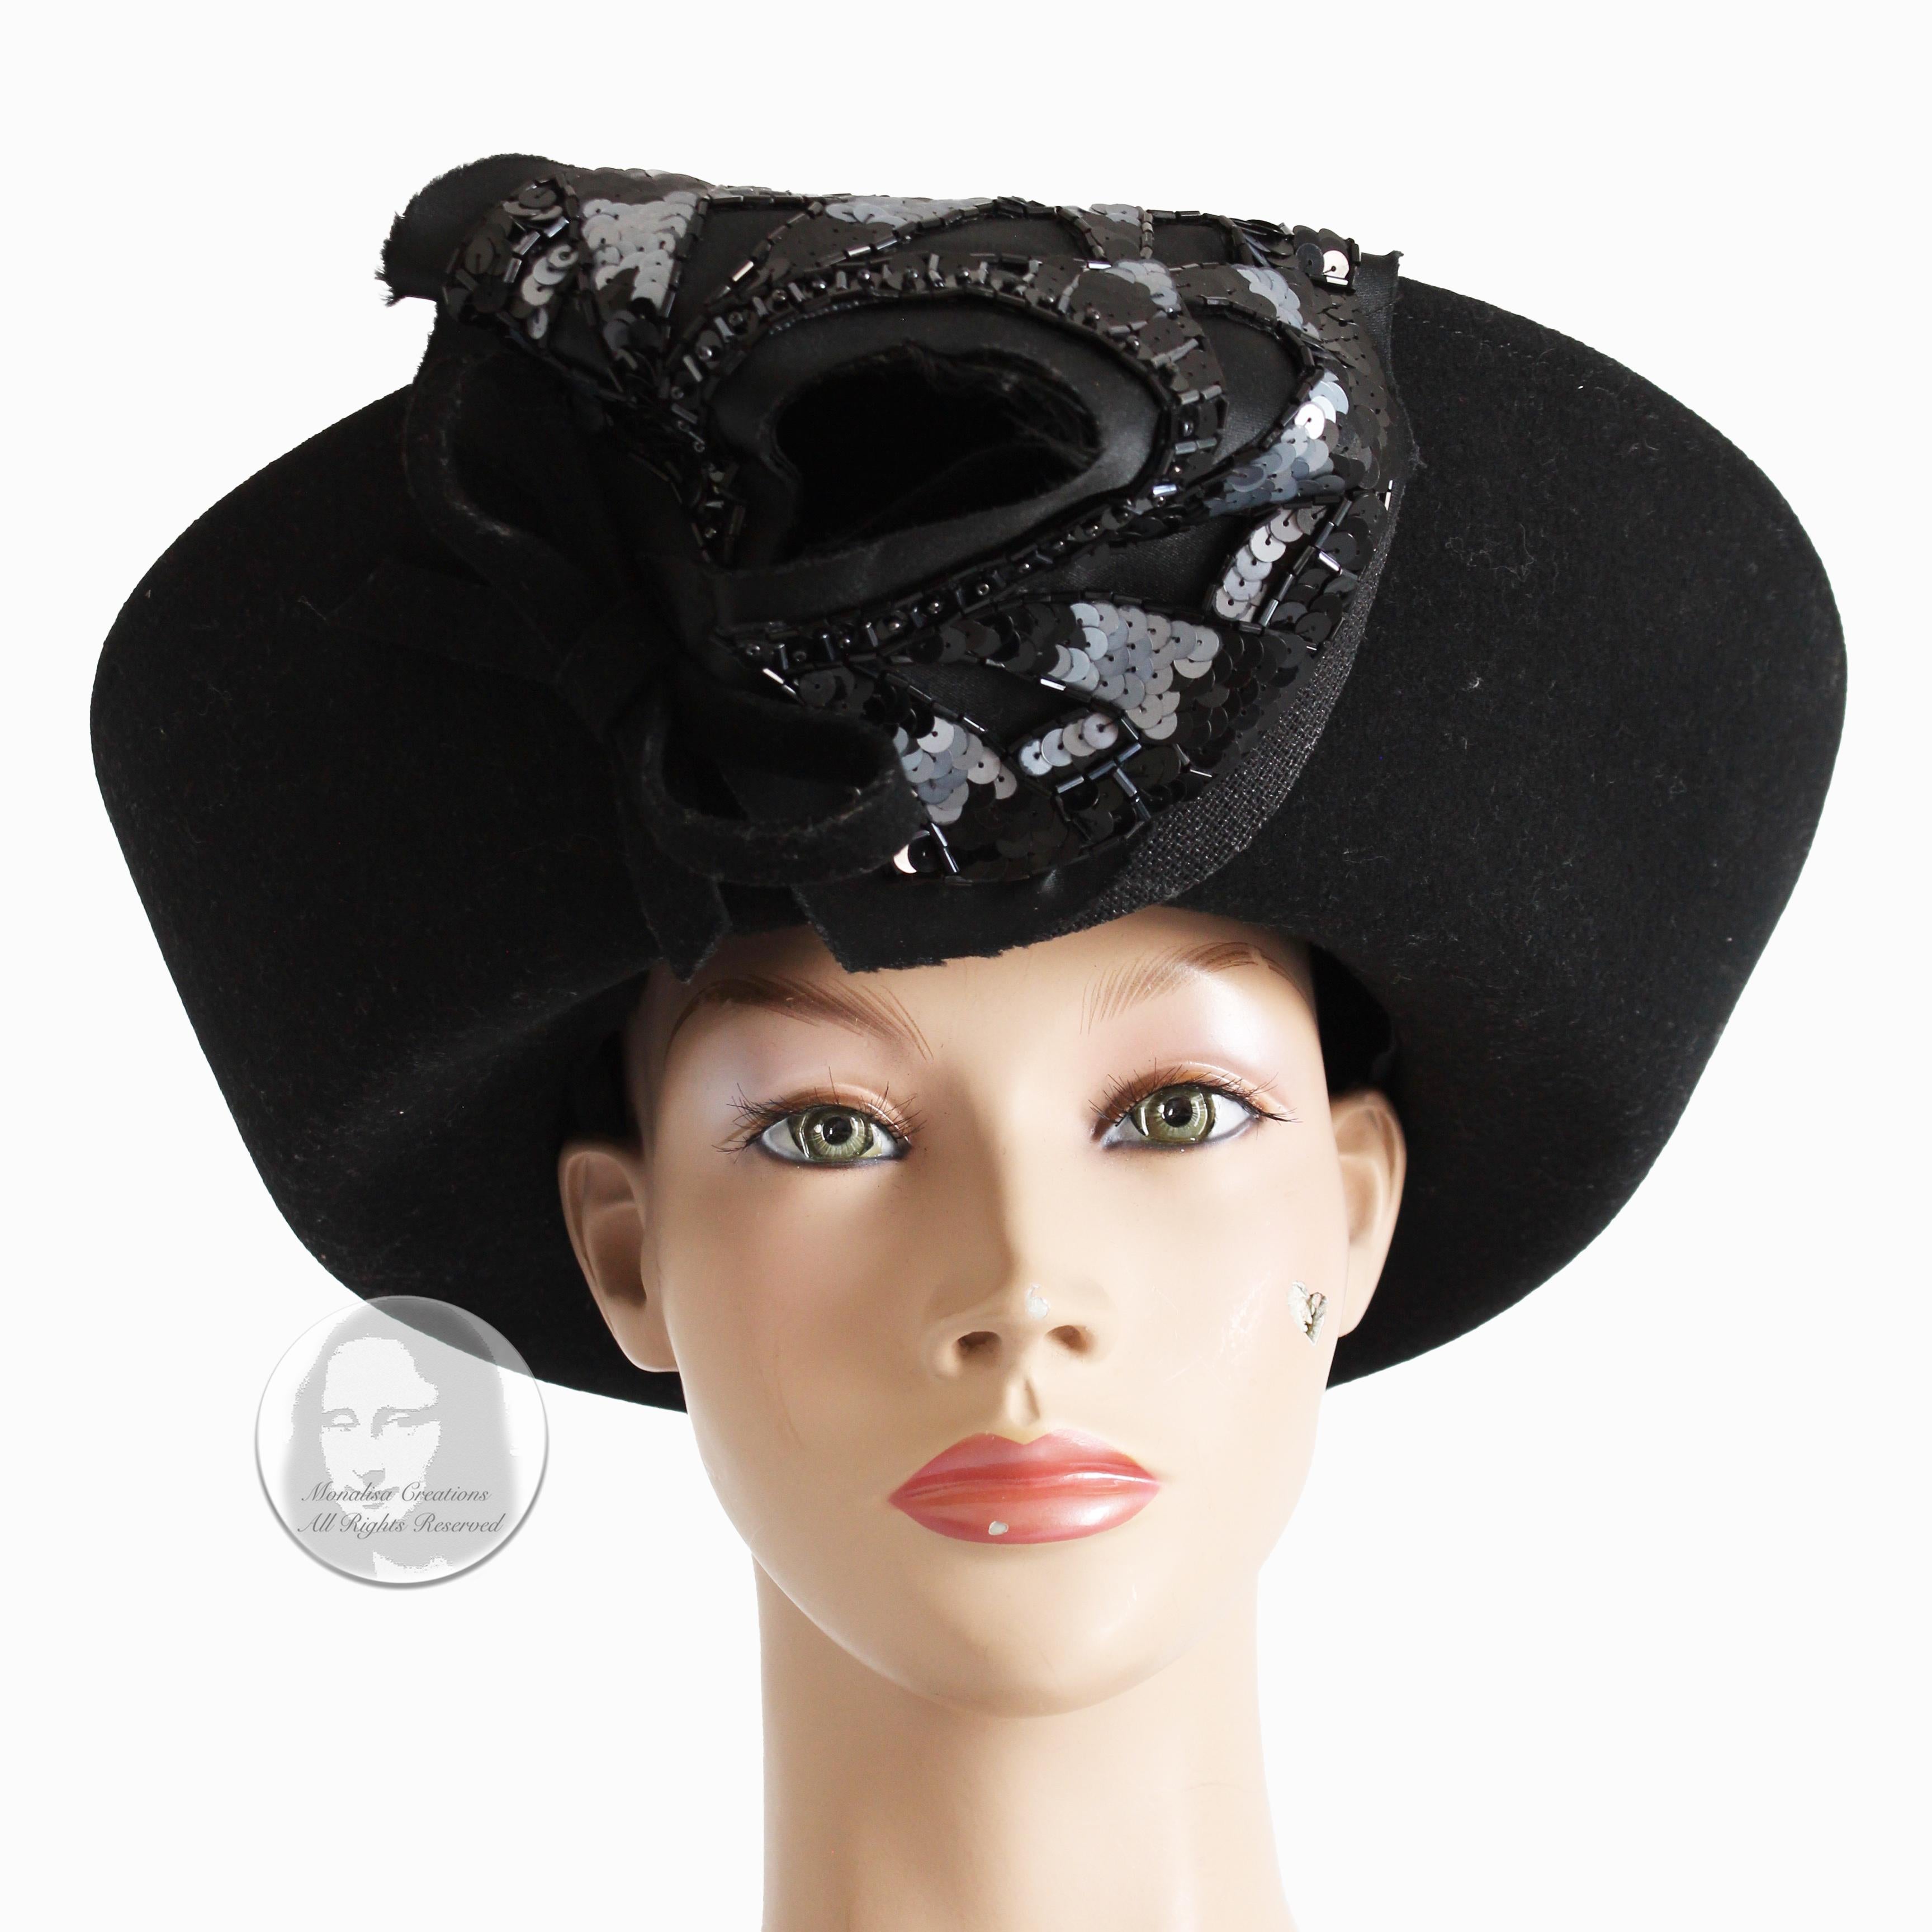 Preowned, vintage Breton style hat, made by milliner Mr. John, most likely in the 60s.  Made from black felt wool, it features a wide upturned brim and an embellished bow at the front.

A fabulous, high fashion hat that's perfect for your events and